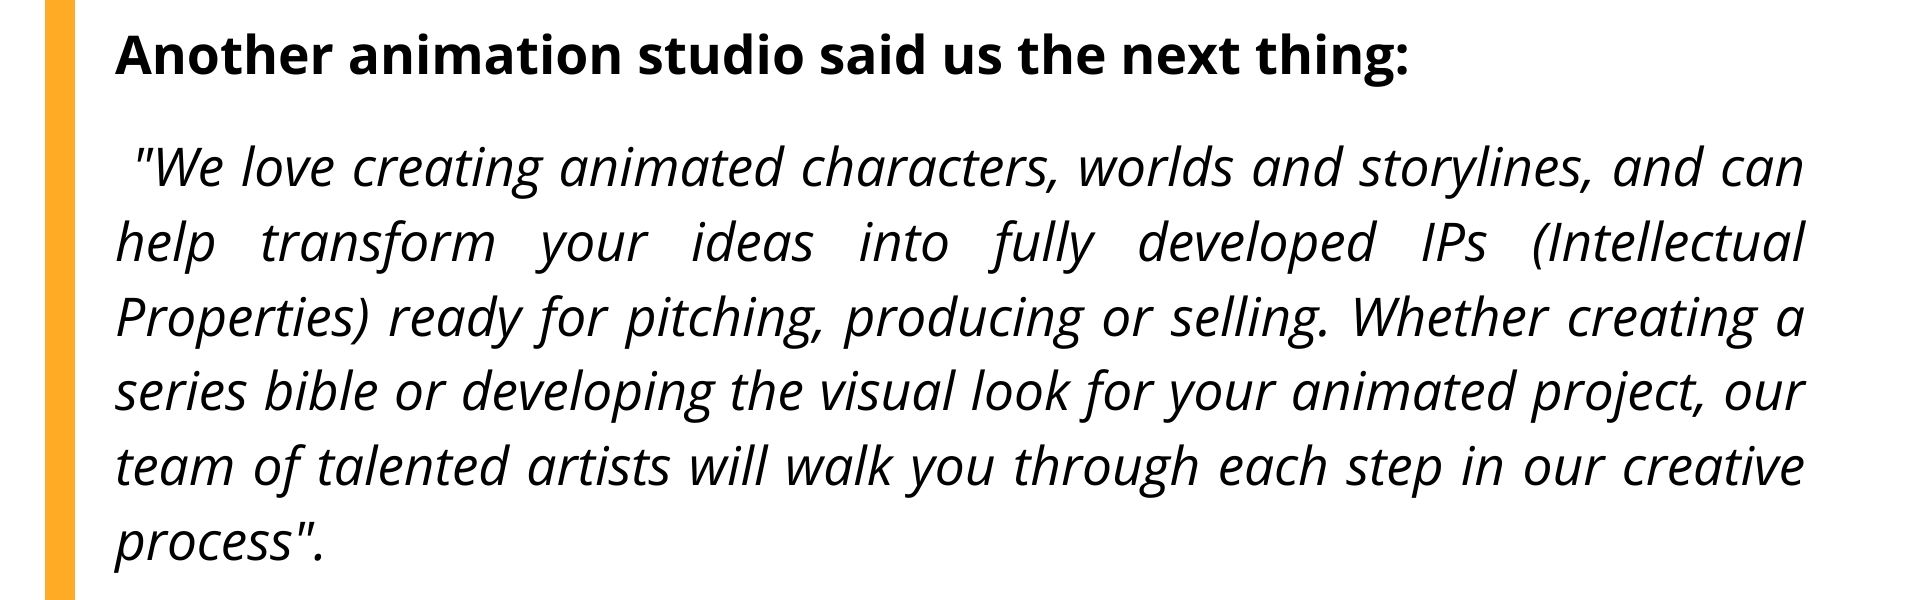 Statements of the animation studio about animation